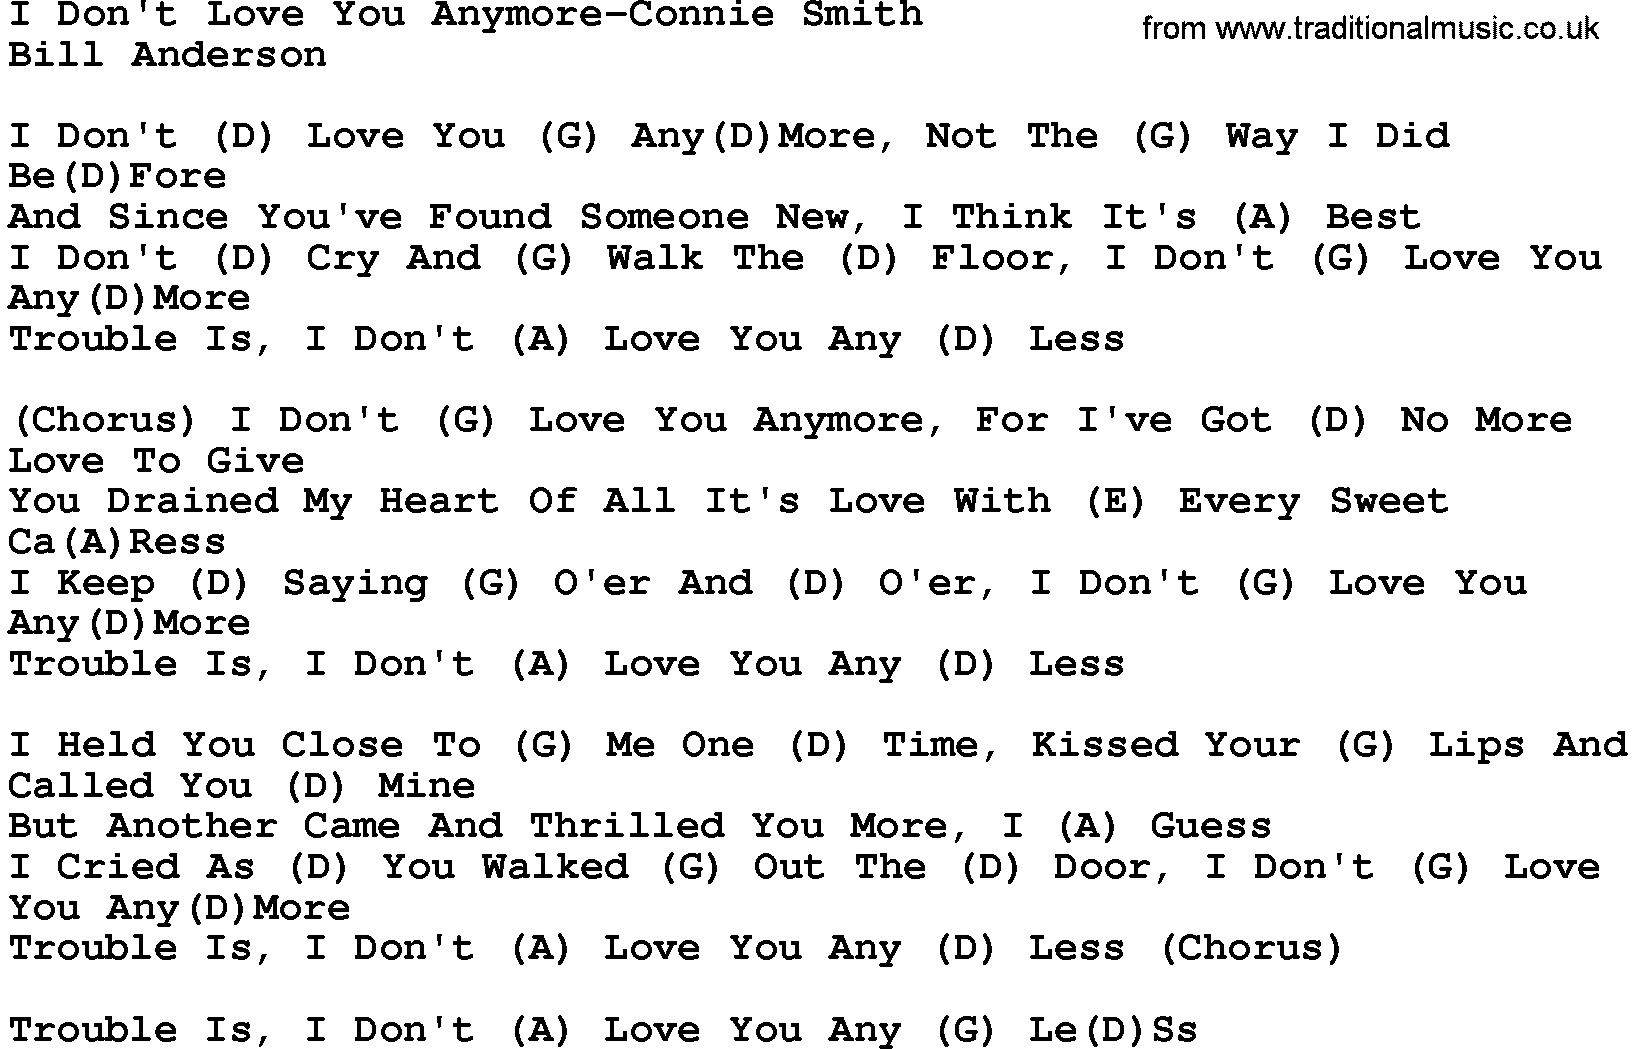 Country music song: I Don't Love You Anymore-Connie Smith lyrics and chords